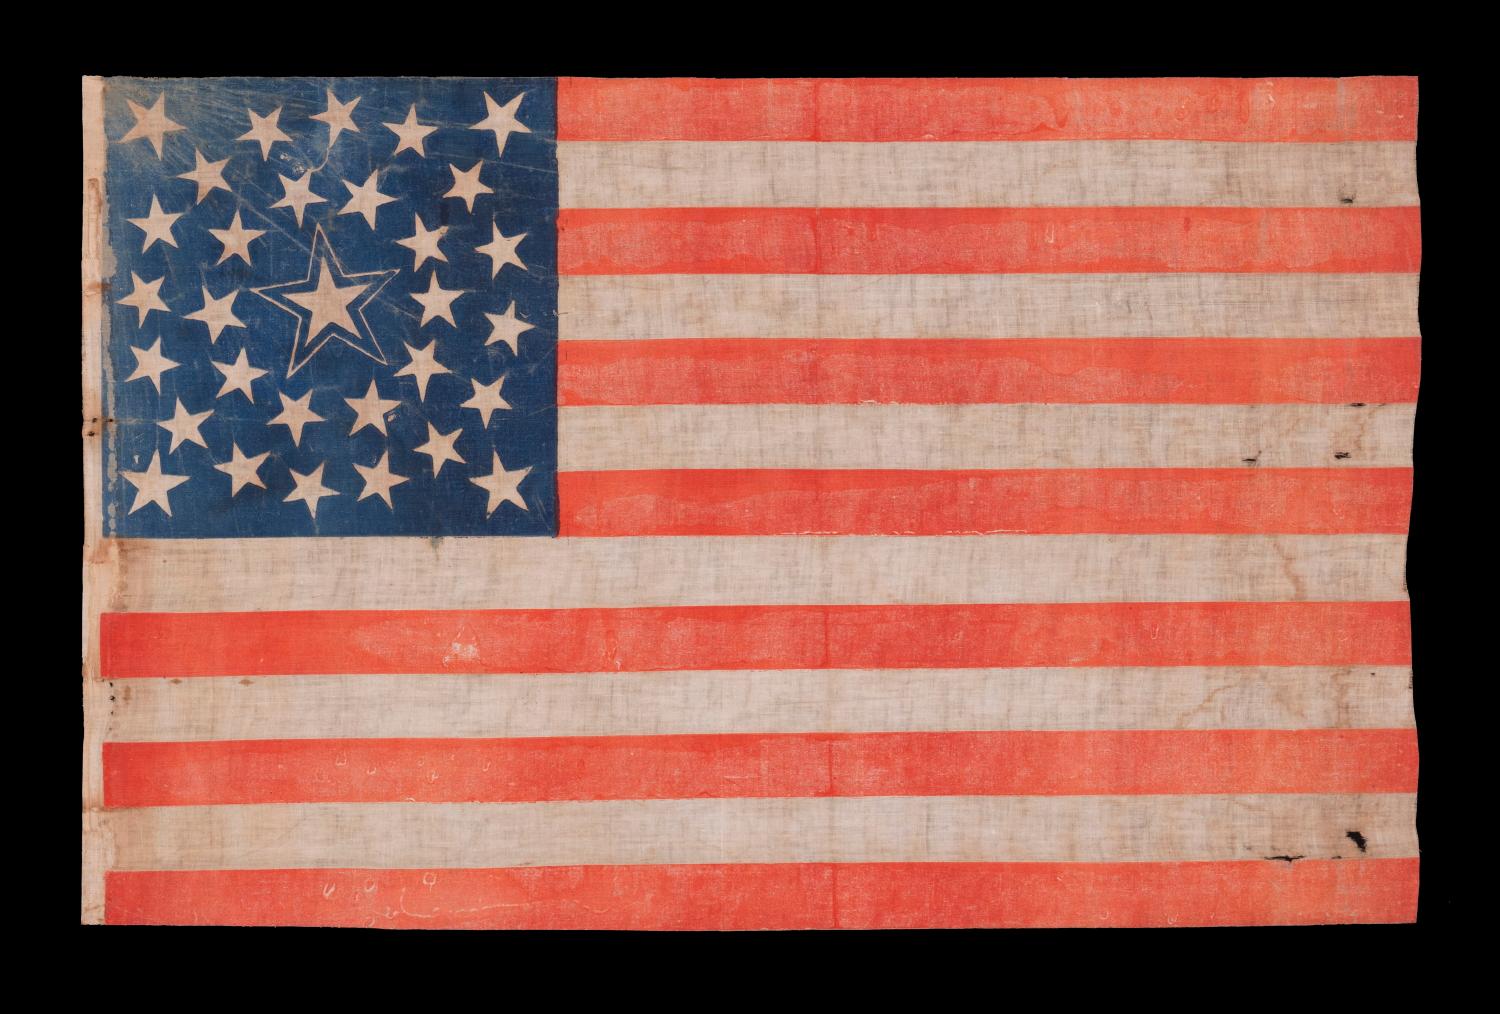 31 Stars, Pre-Civil War (1850-1858), California Statehood, Medallion Configuration With A Large, Haloed Center Star

31 star American national flag, printed on plain weave cotton, with a medallion configuration of stars. This consists of a large